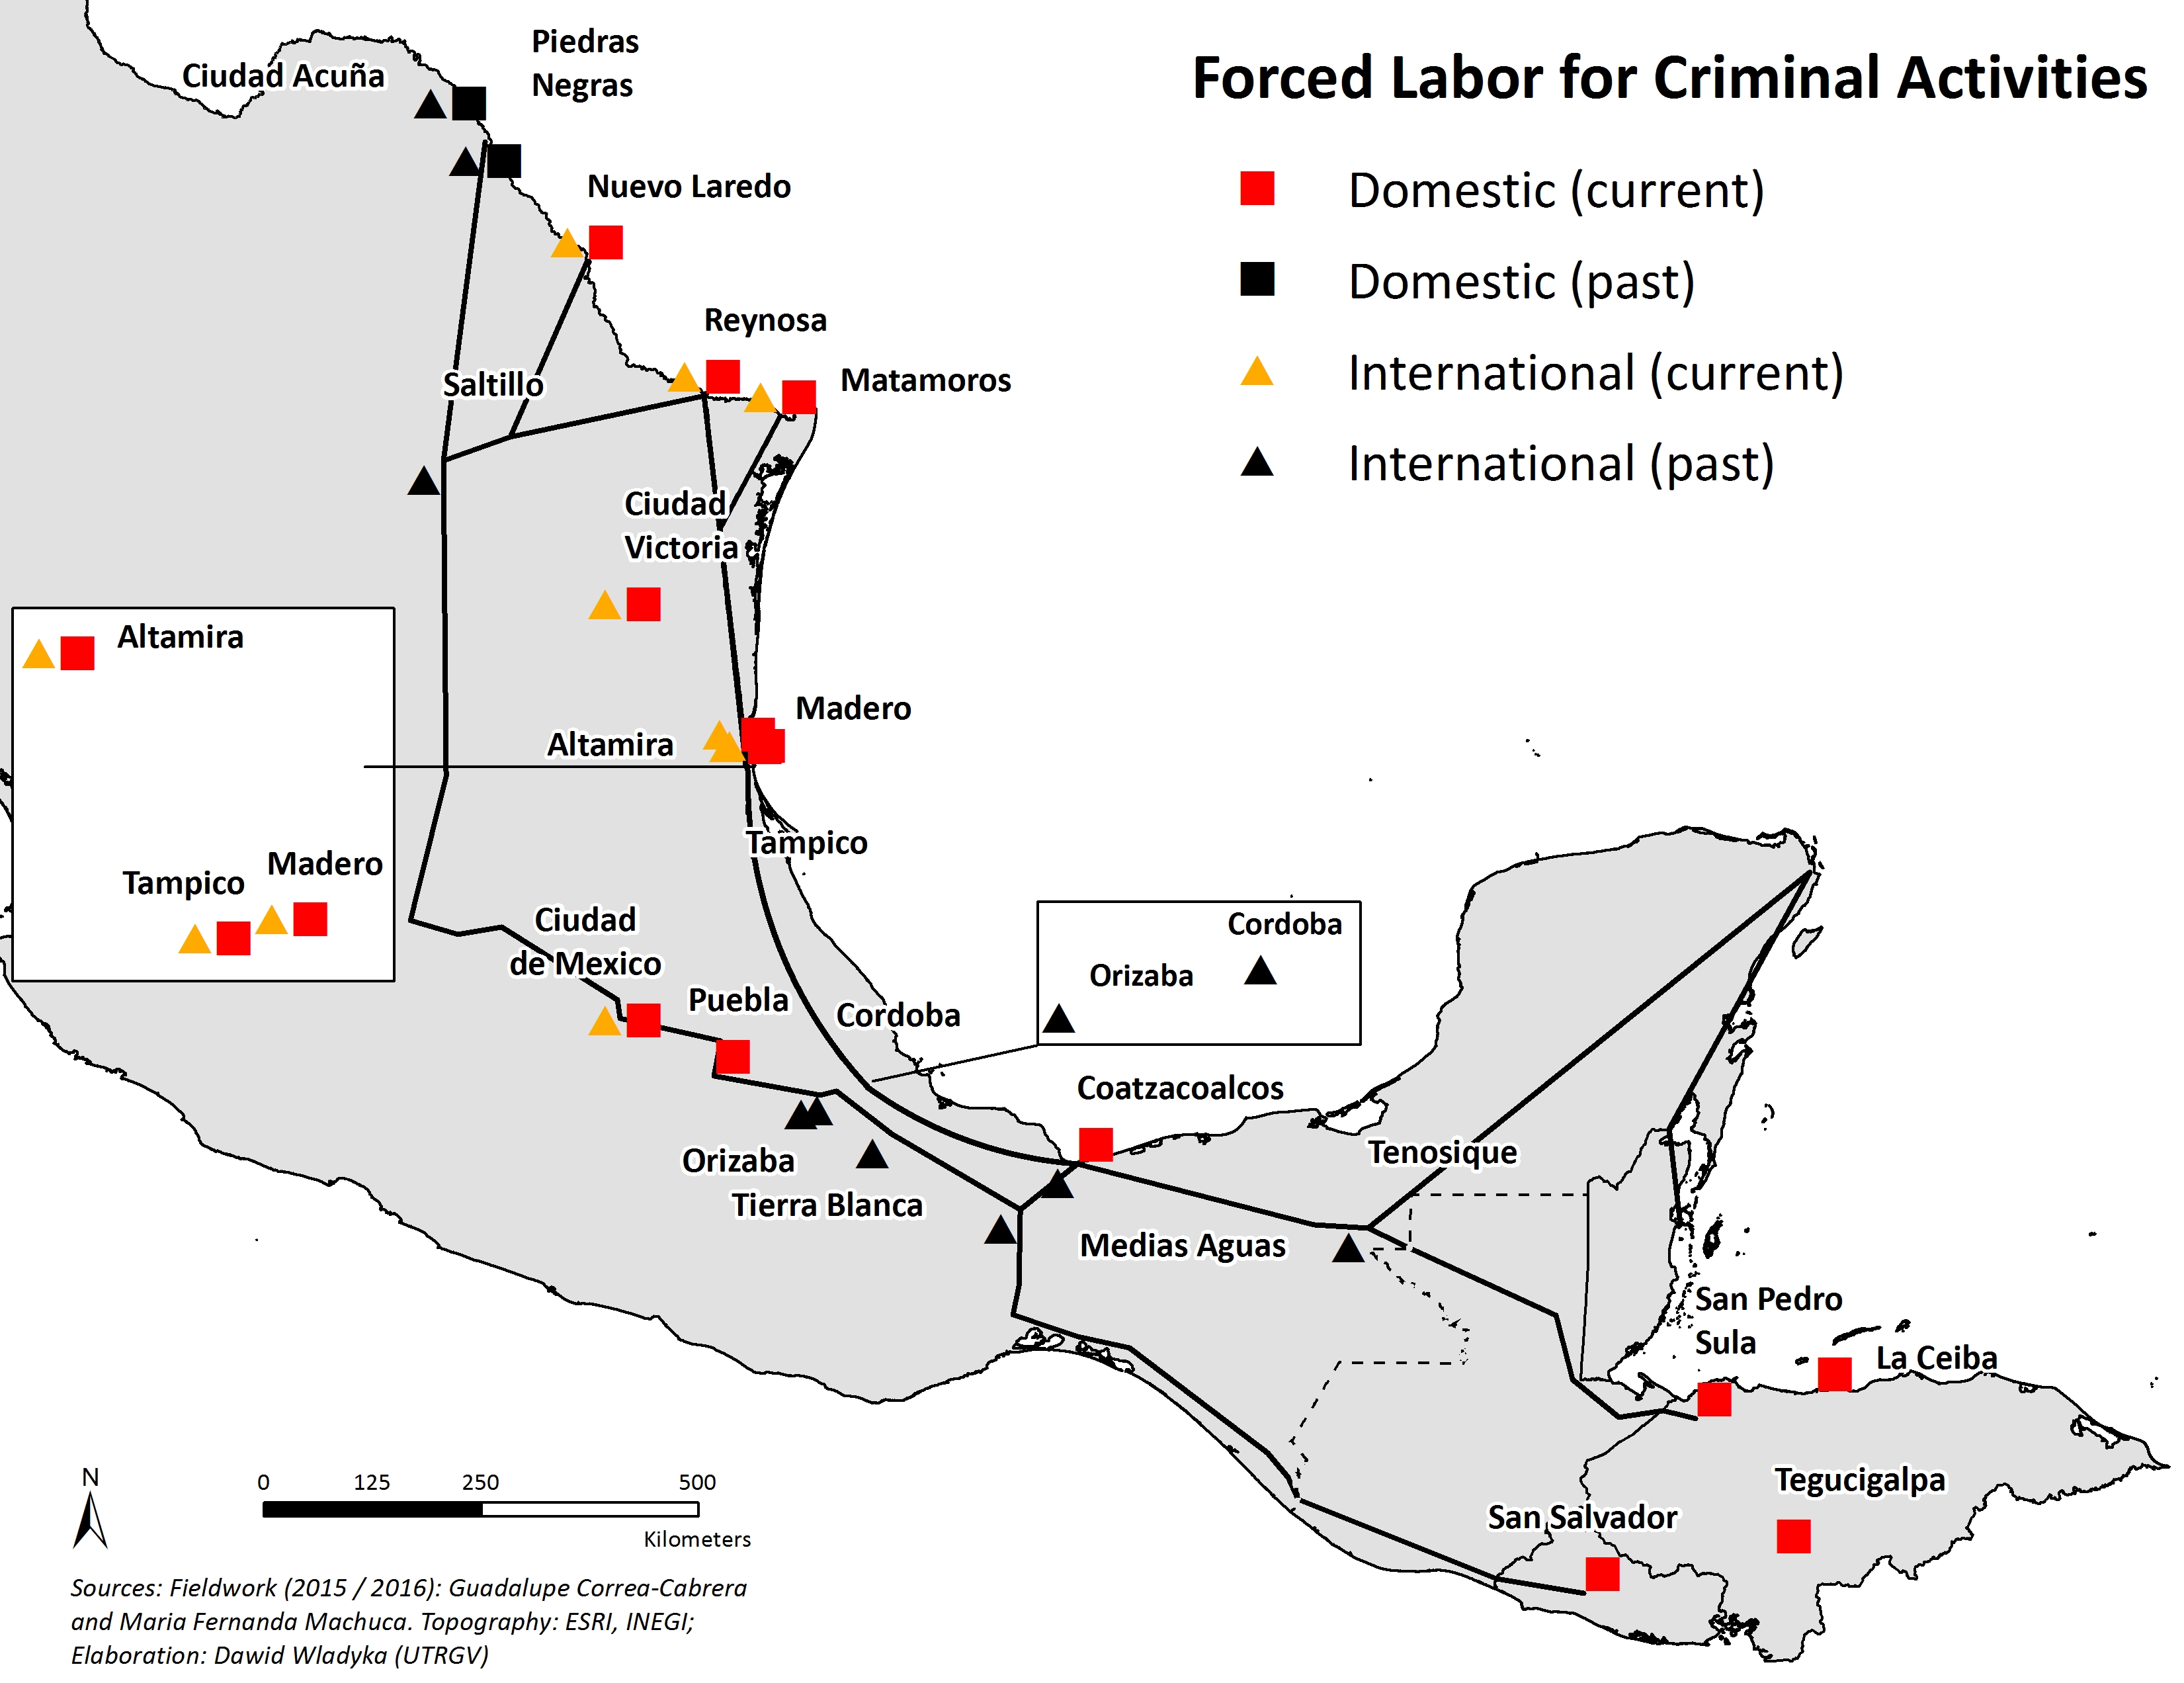 Forced Labor for Criminal Activities